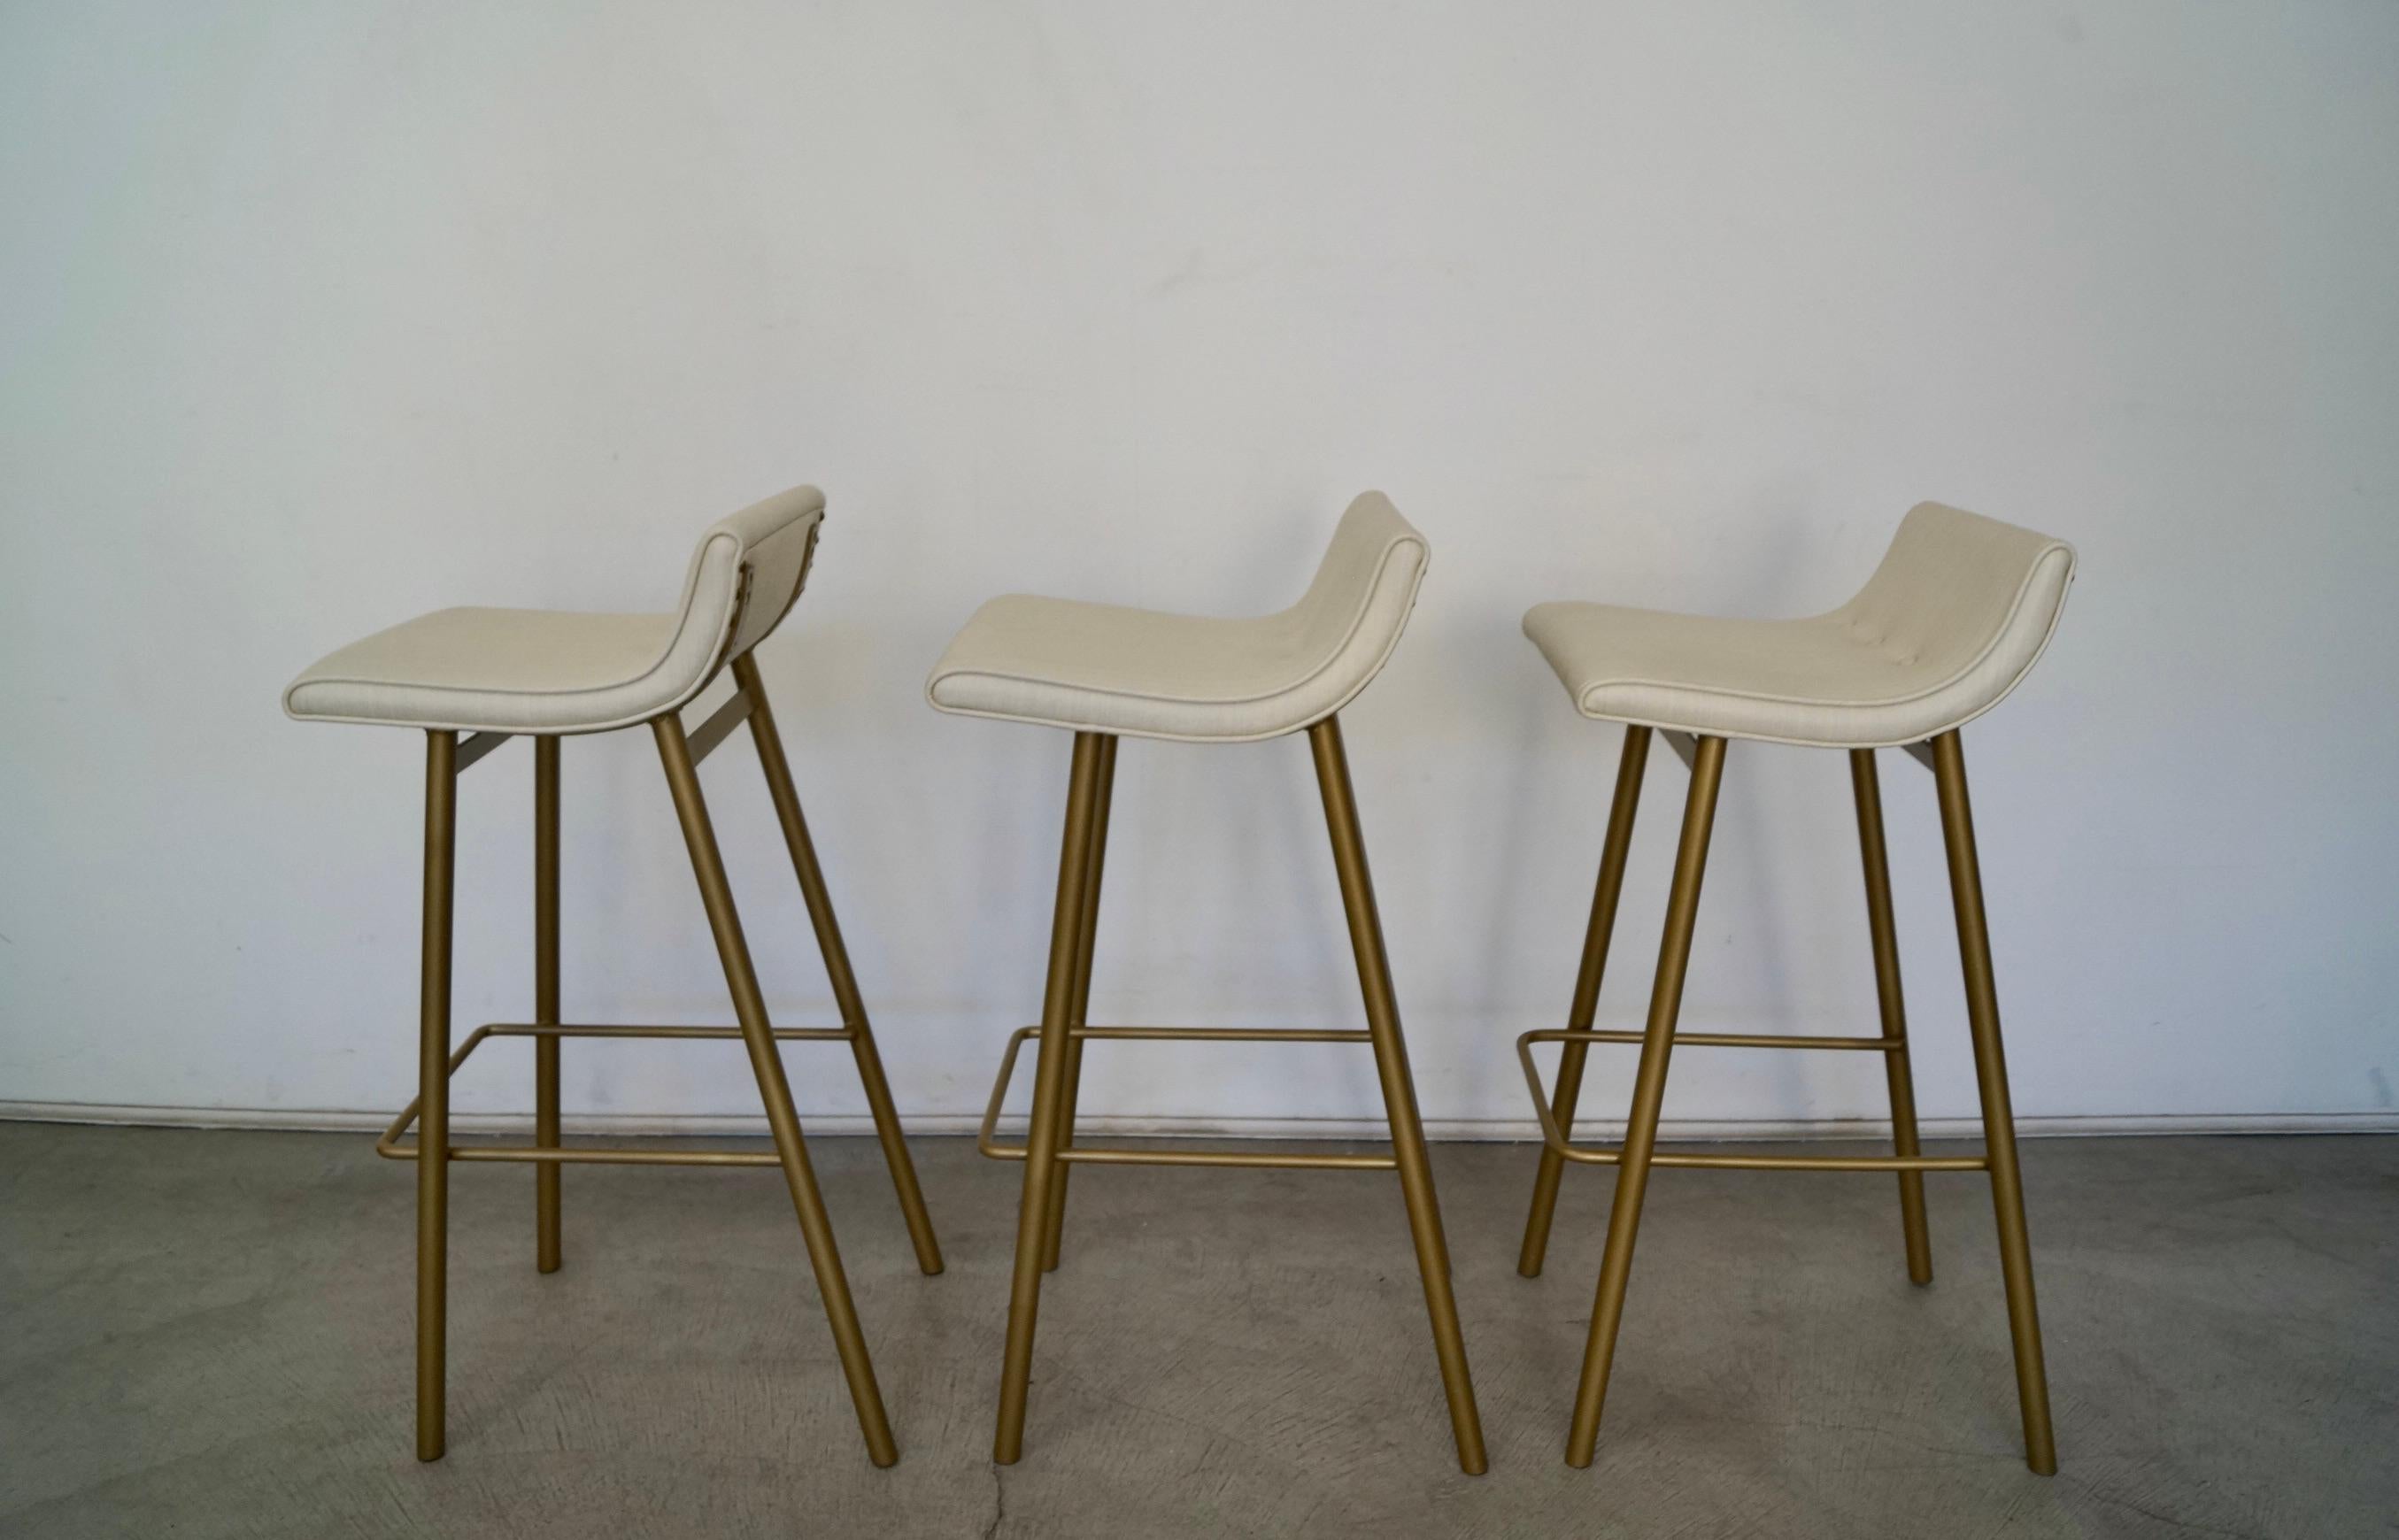 1950's Mid-Century Modern Bar Stools by Vista of California - Set of Three For Sale 2